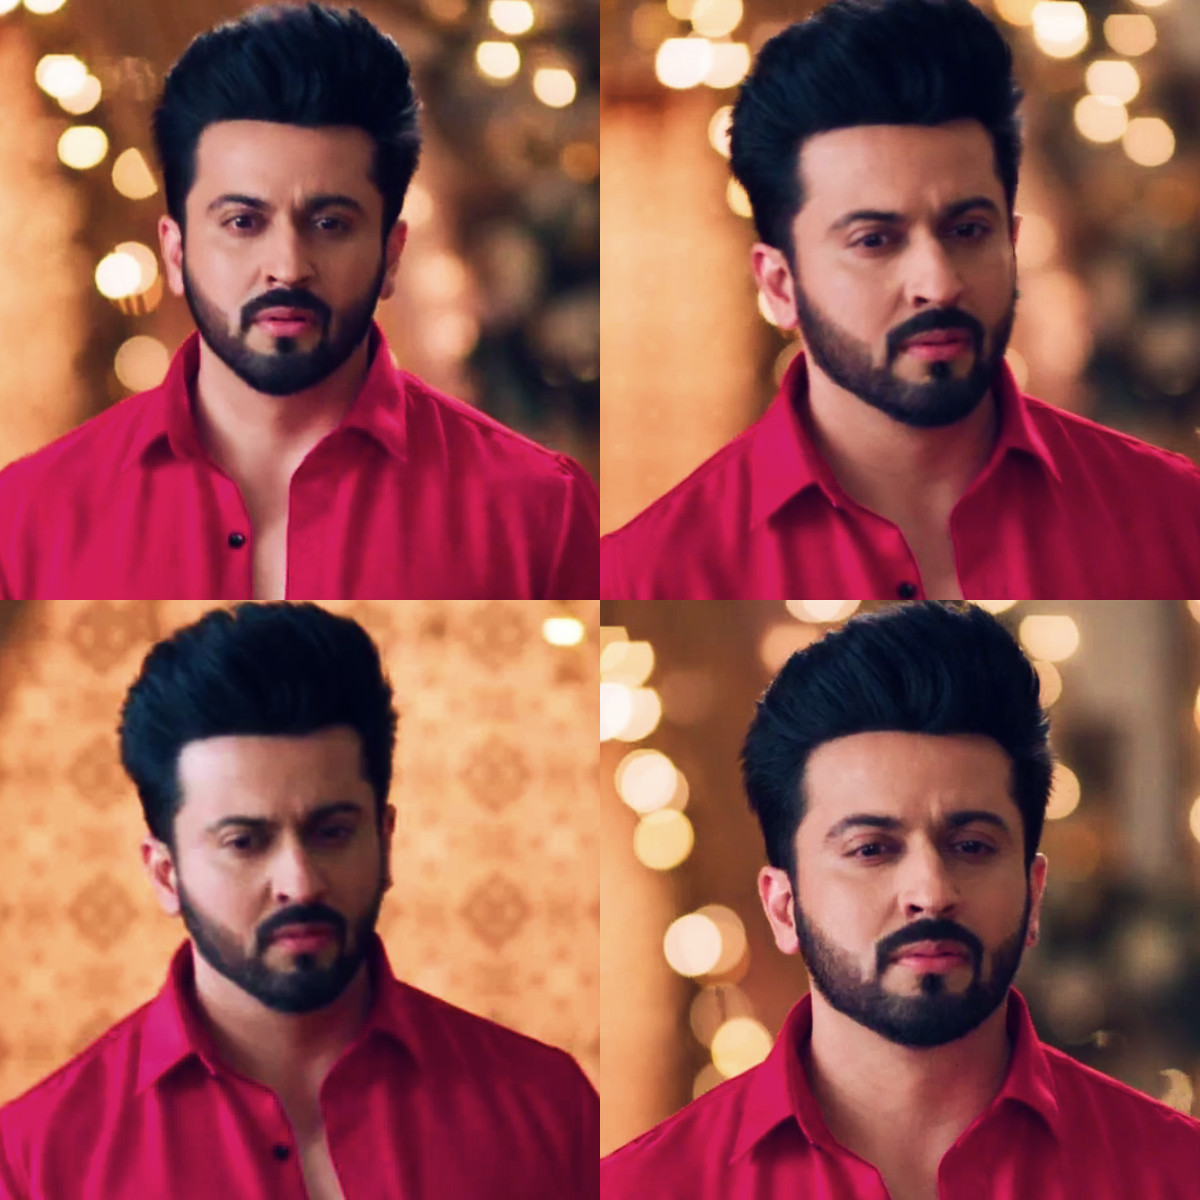 there are great things happening not even a human mind can comprehend, it's beyond you, you'd be surprised at how much Ibadat loves you.

Never say never Subhaan Siddiqui

#DheerajDhoopar #SubhaanSiddiqui #RabbSeHaiDua